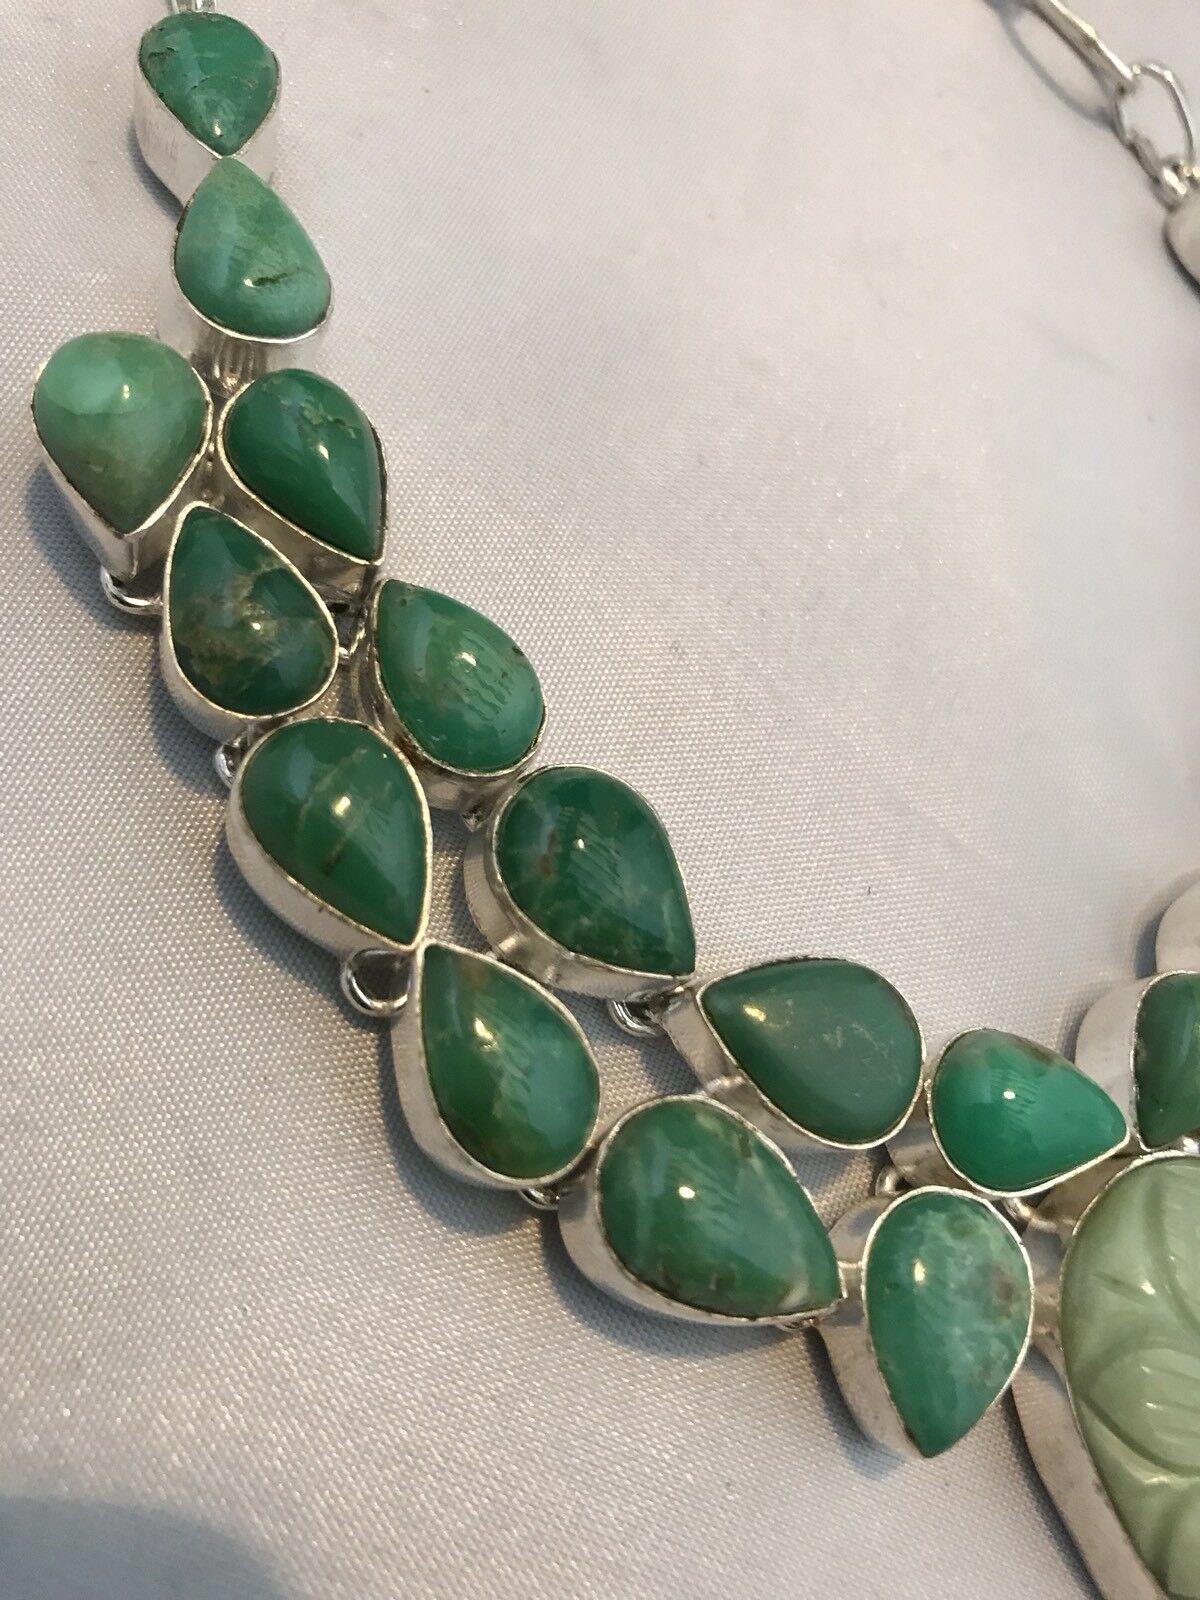 Stylish Statement Natural Green Carved Stone Necklace